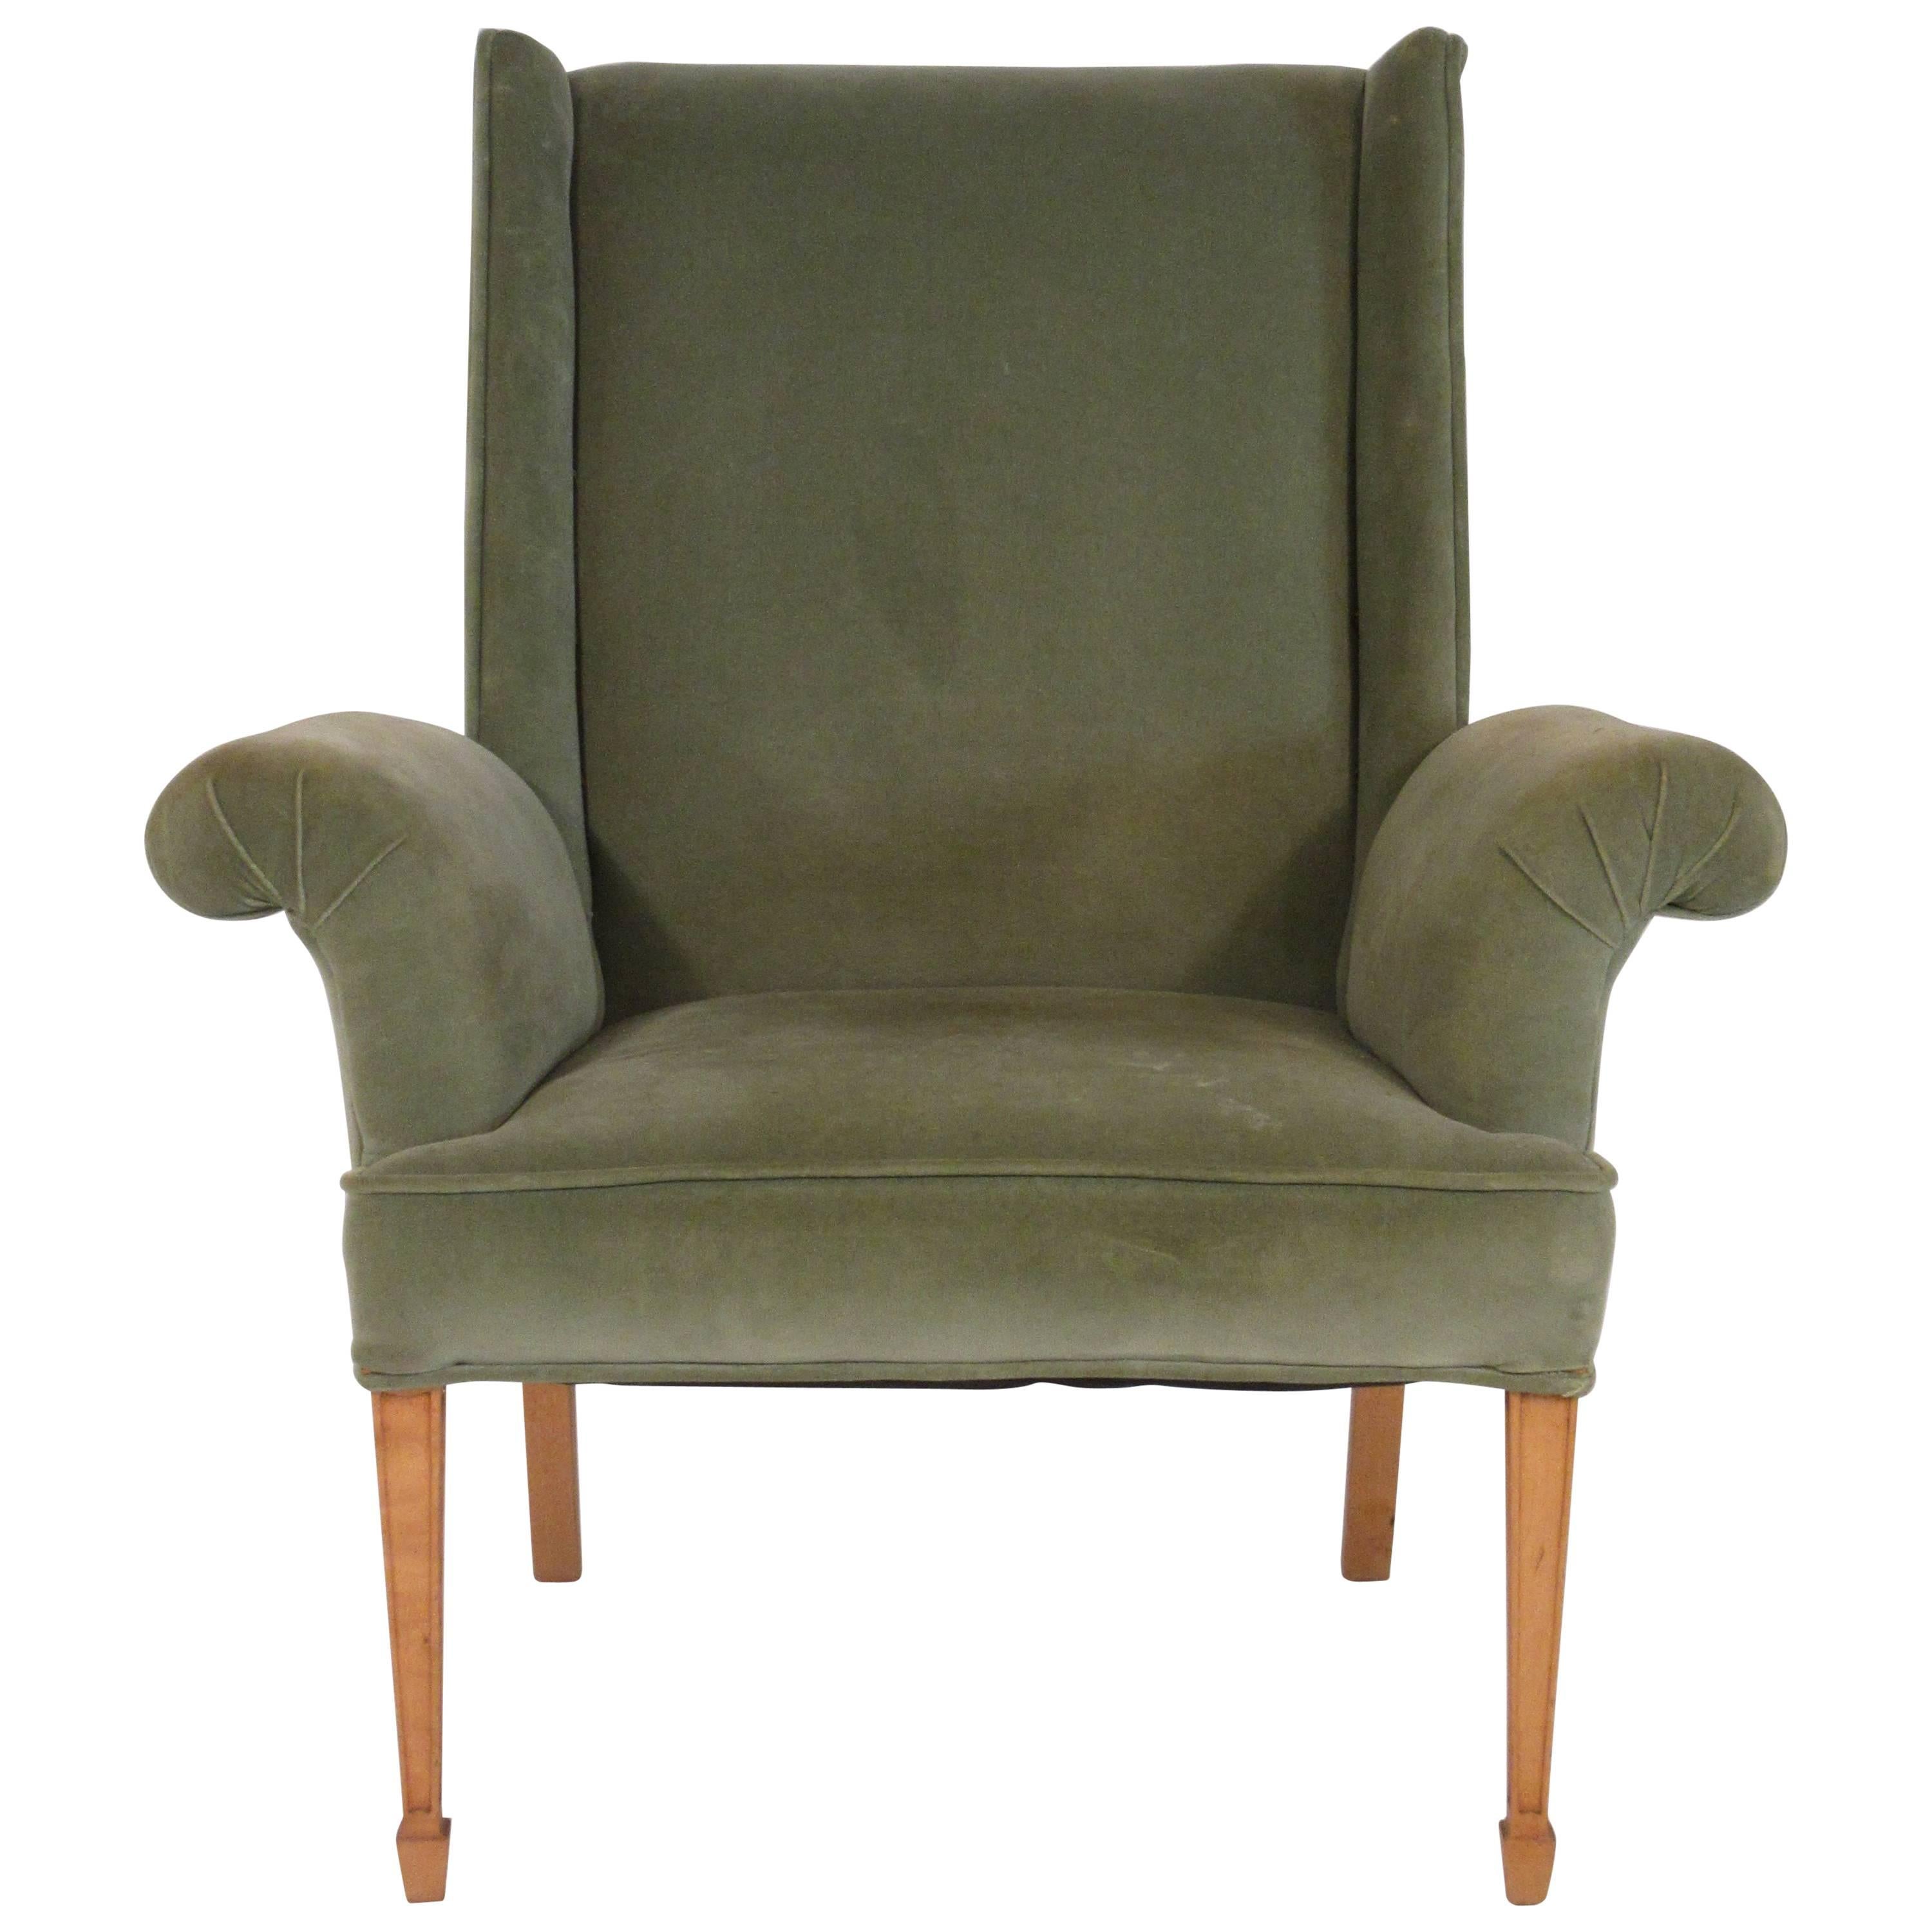 1940s French Oversized Wingback Chair